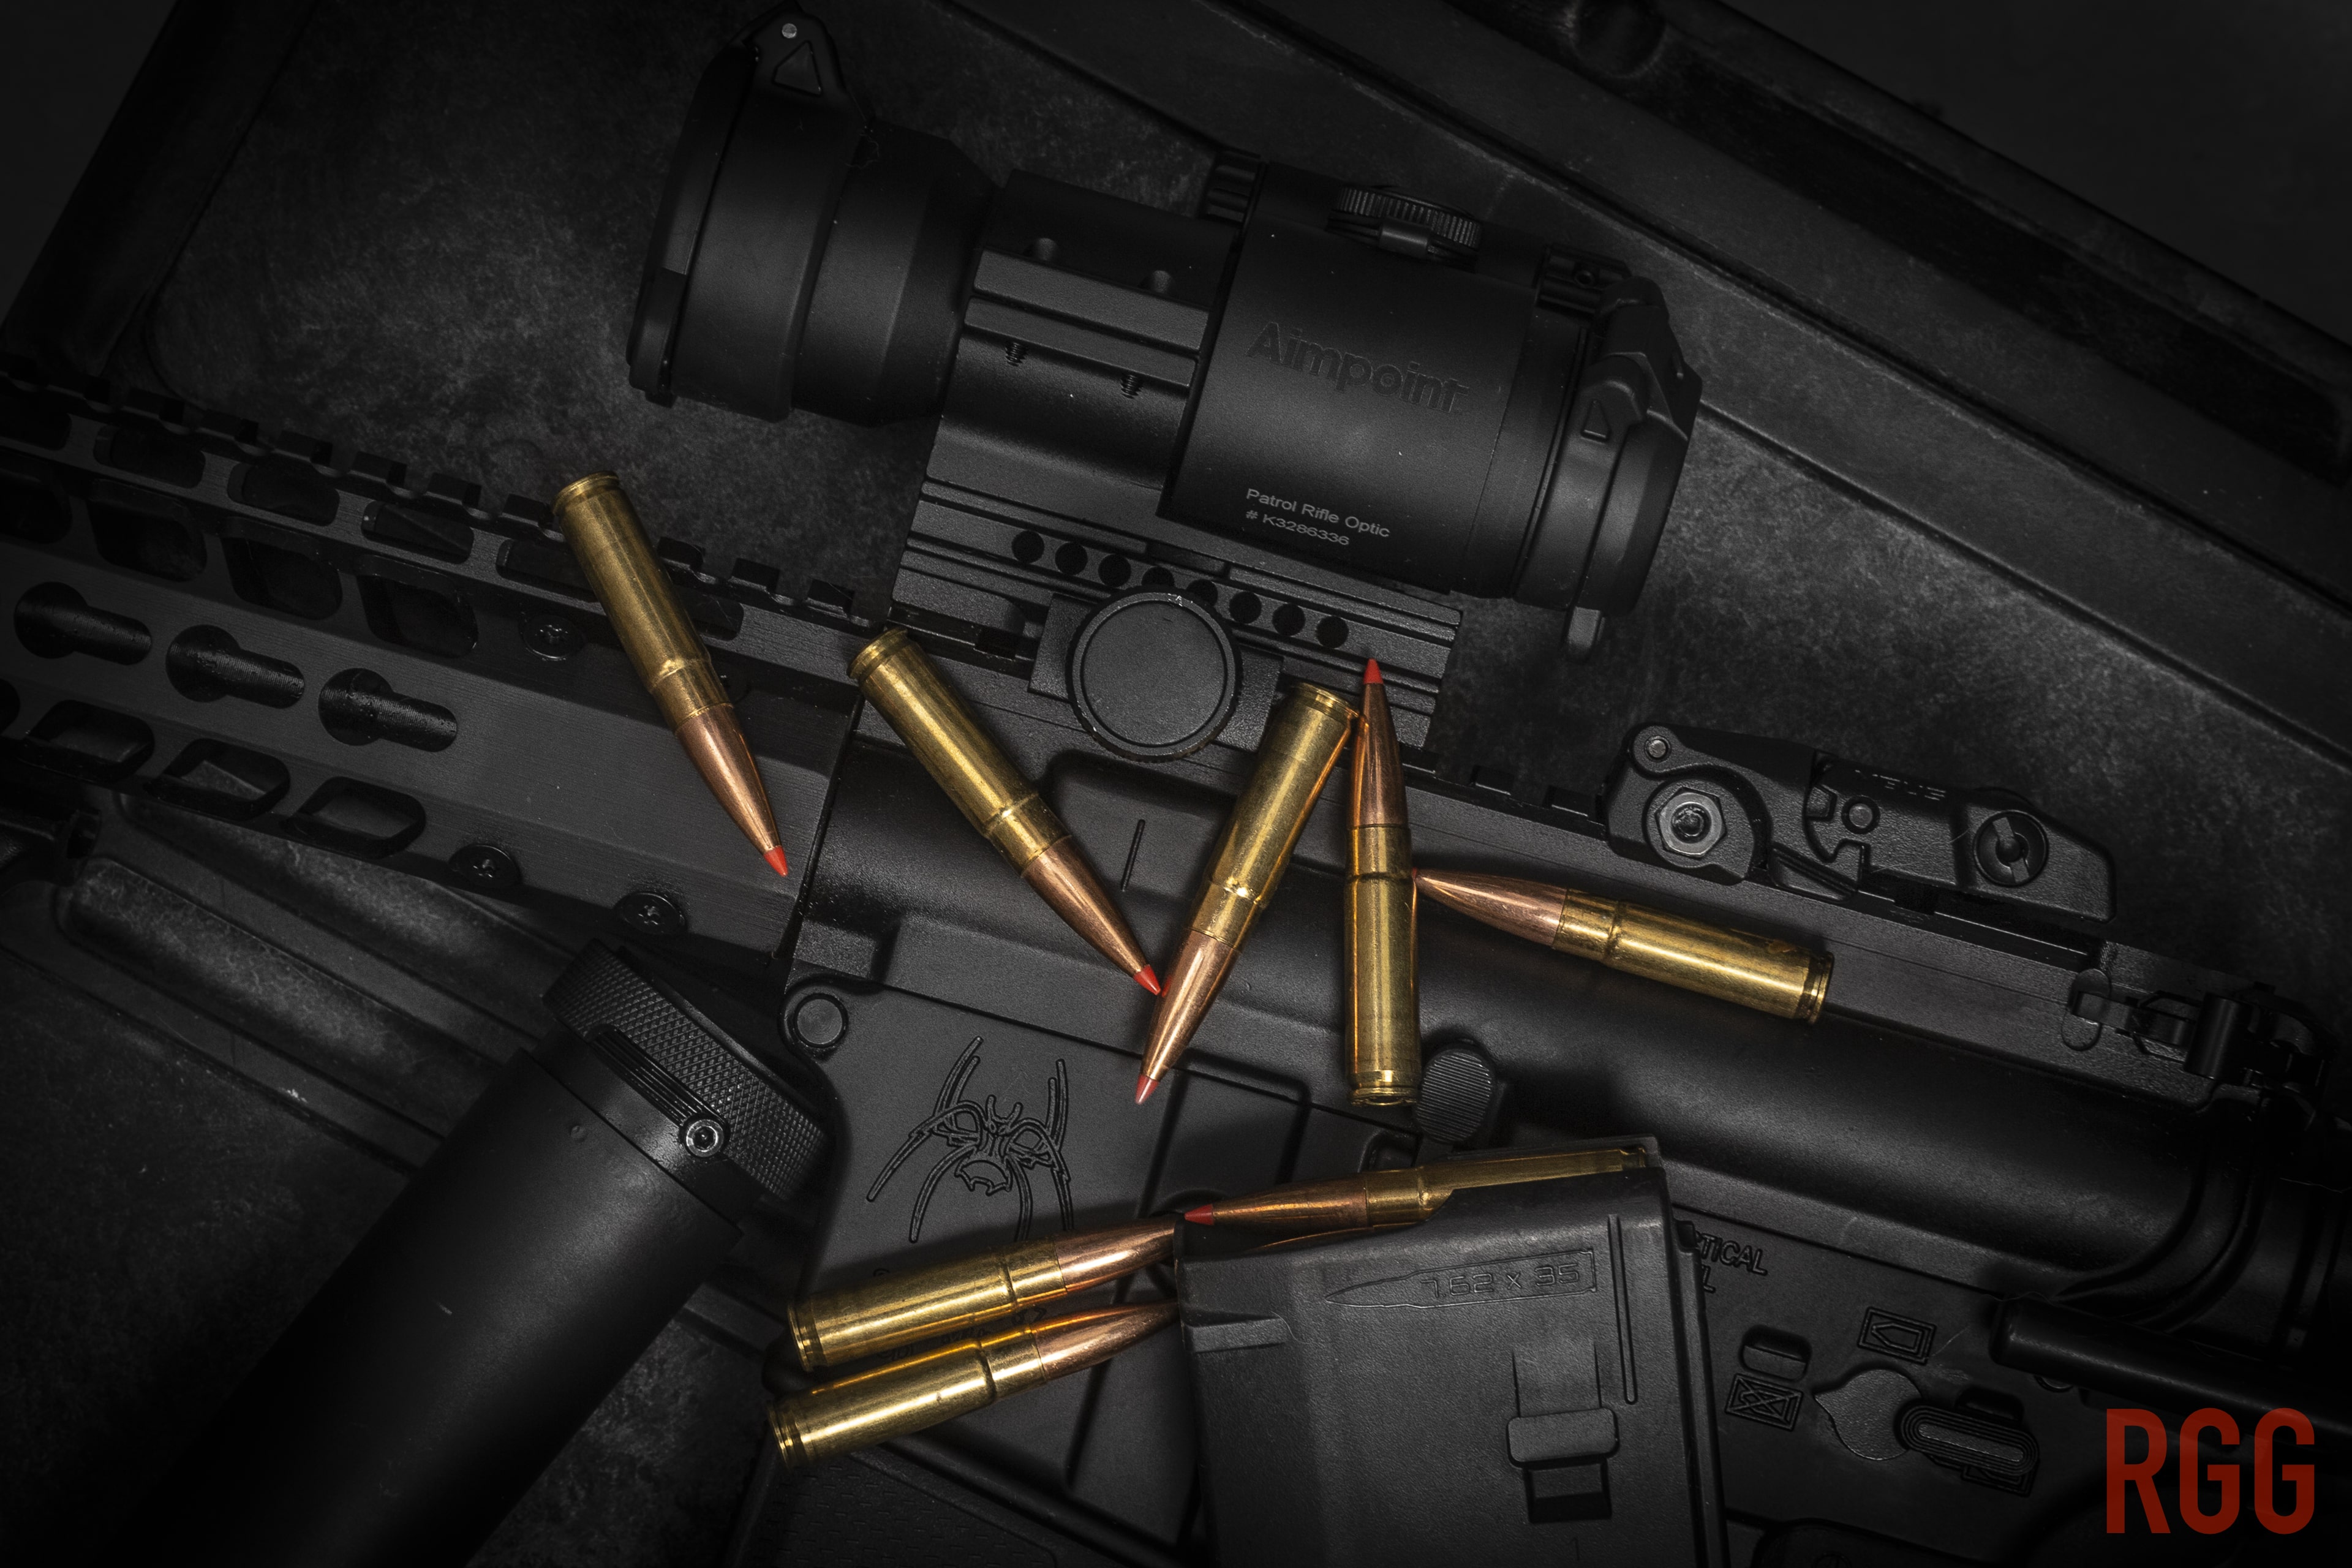 Subsonic 300BLK ammo featuring Norma brass and Hornady projectiles.